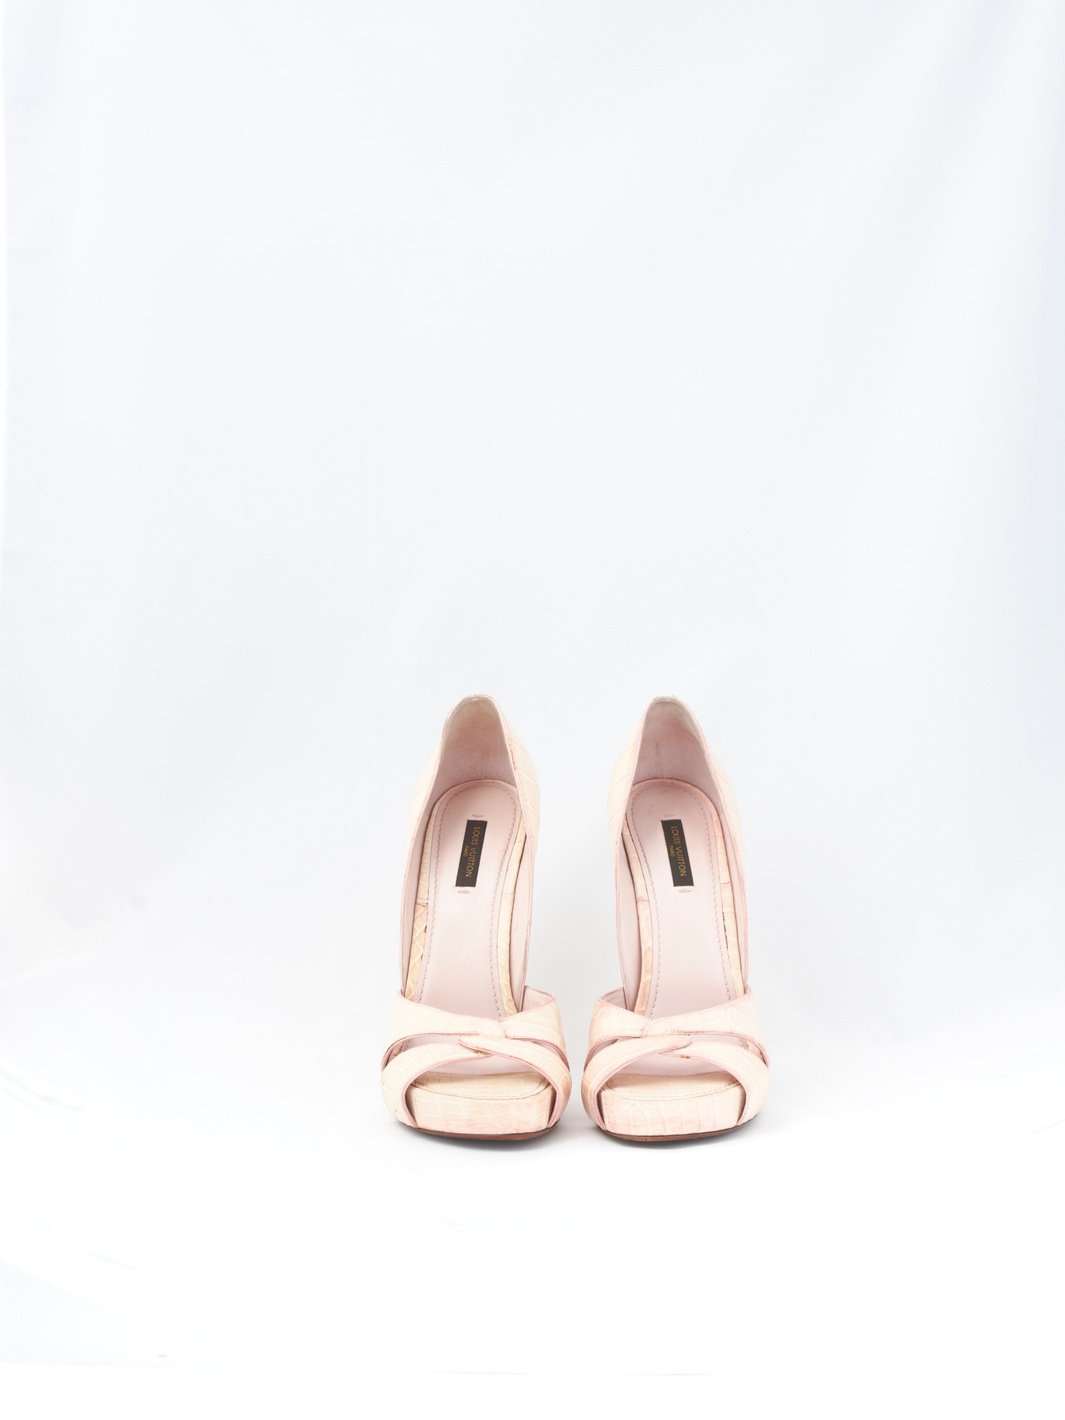 2010 Louis Vuitton sandals in light pink leather with very high heel